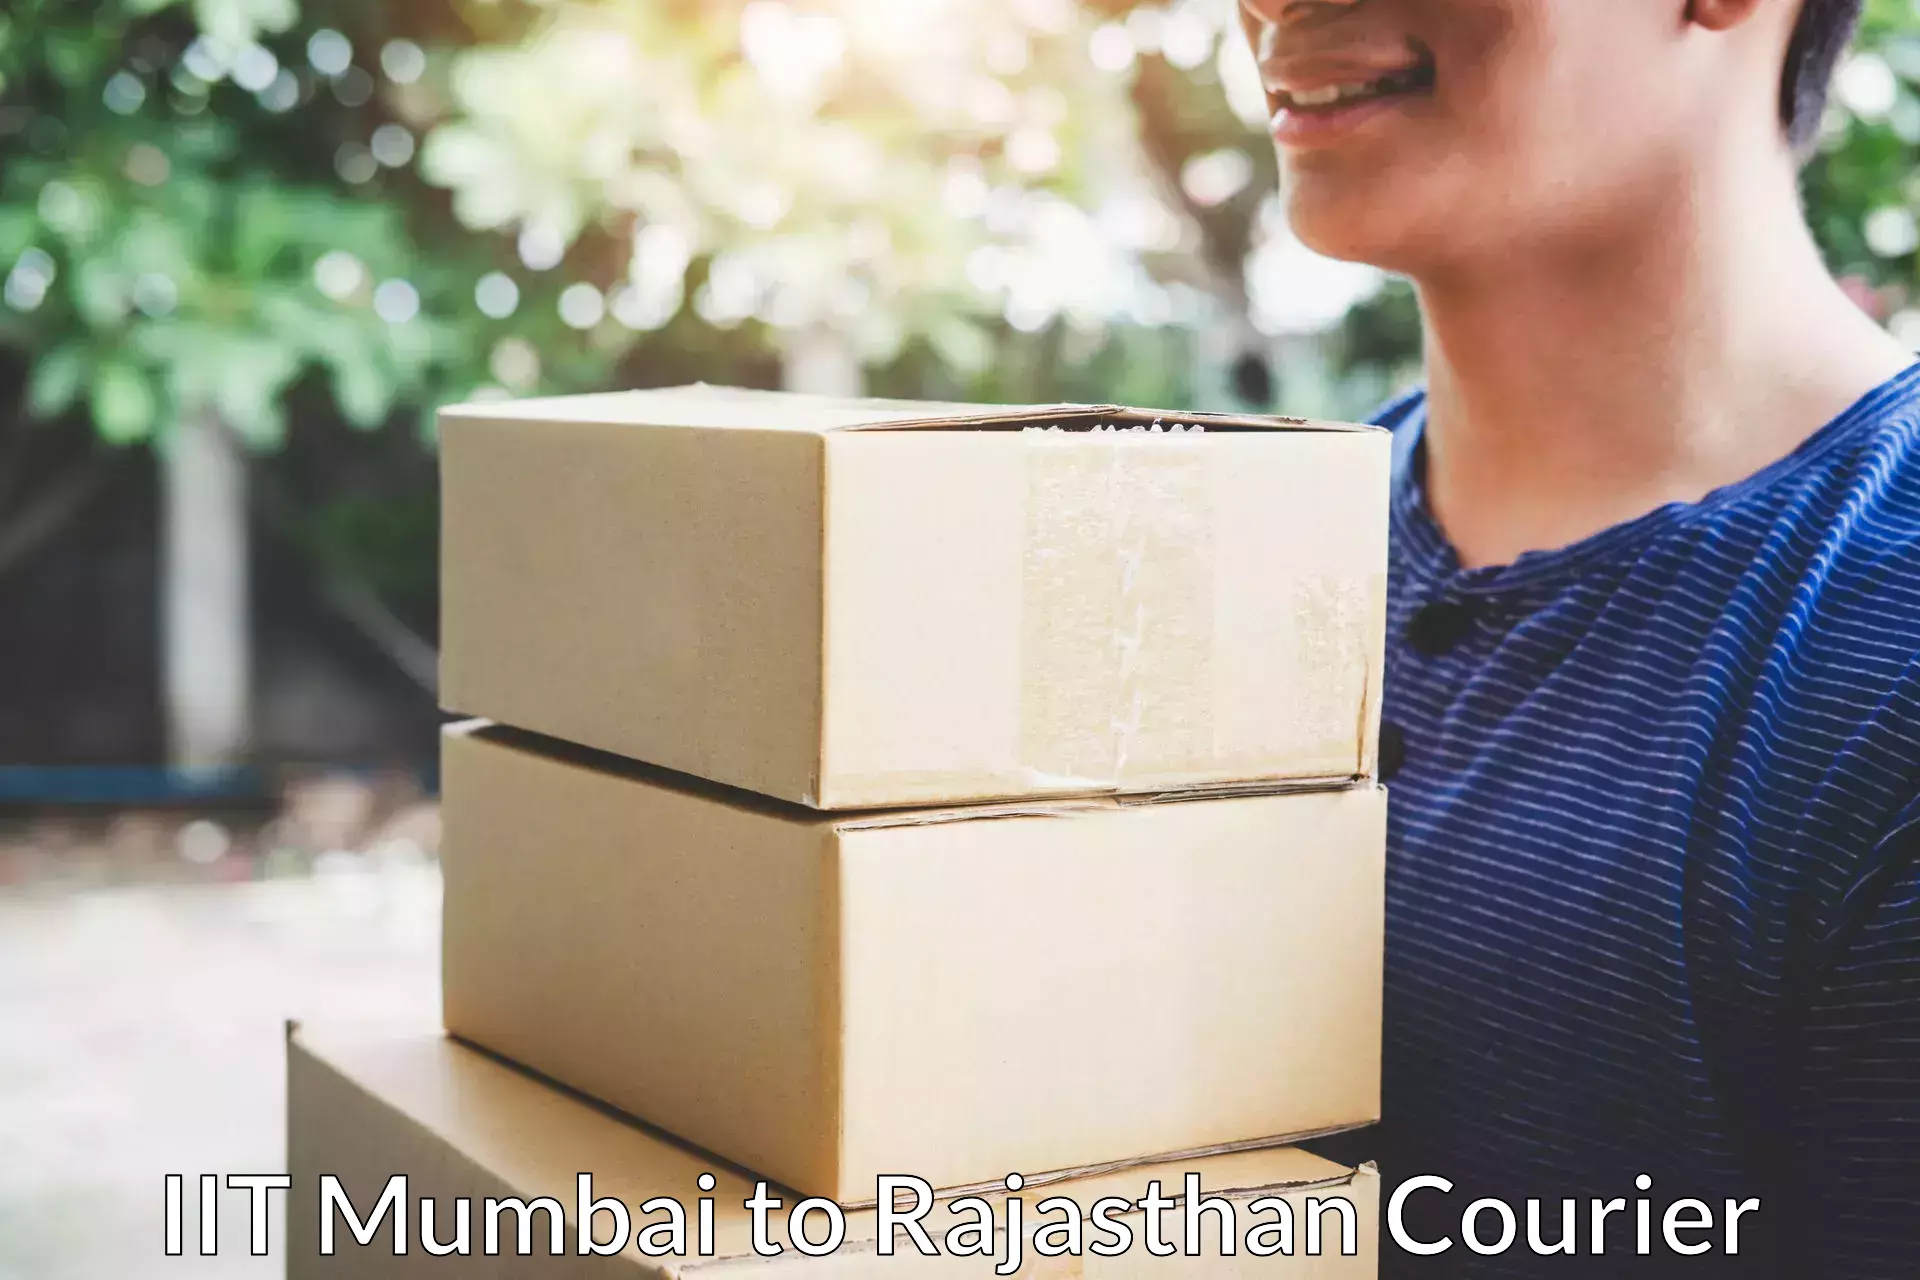 Expert household relocation in IIT Mumbai to Rajasthan